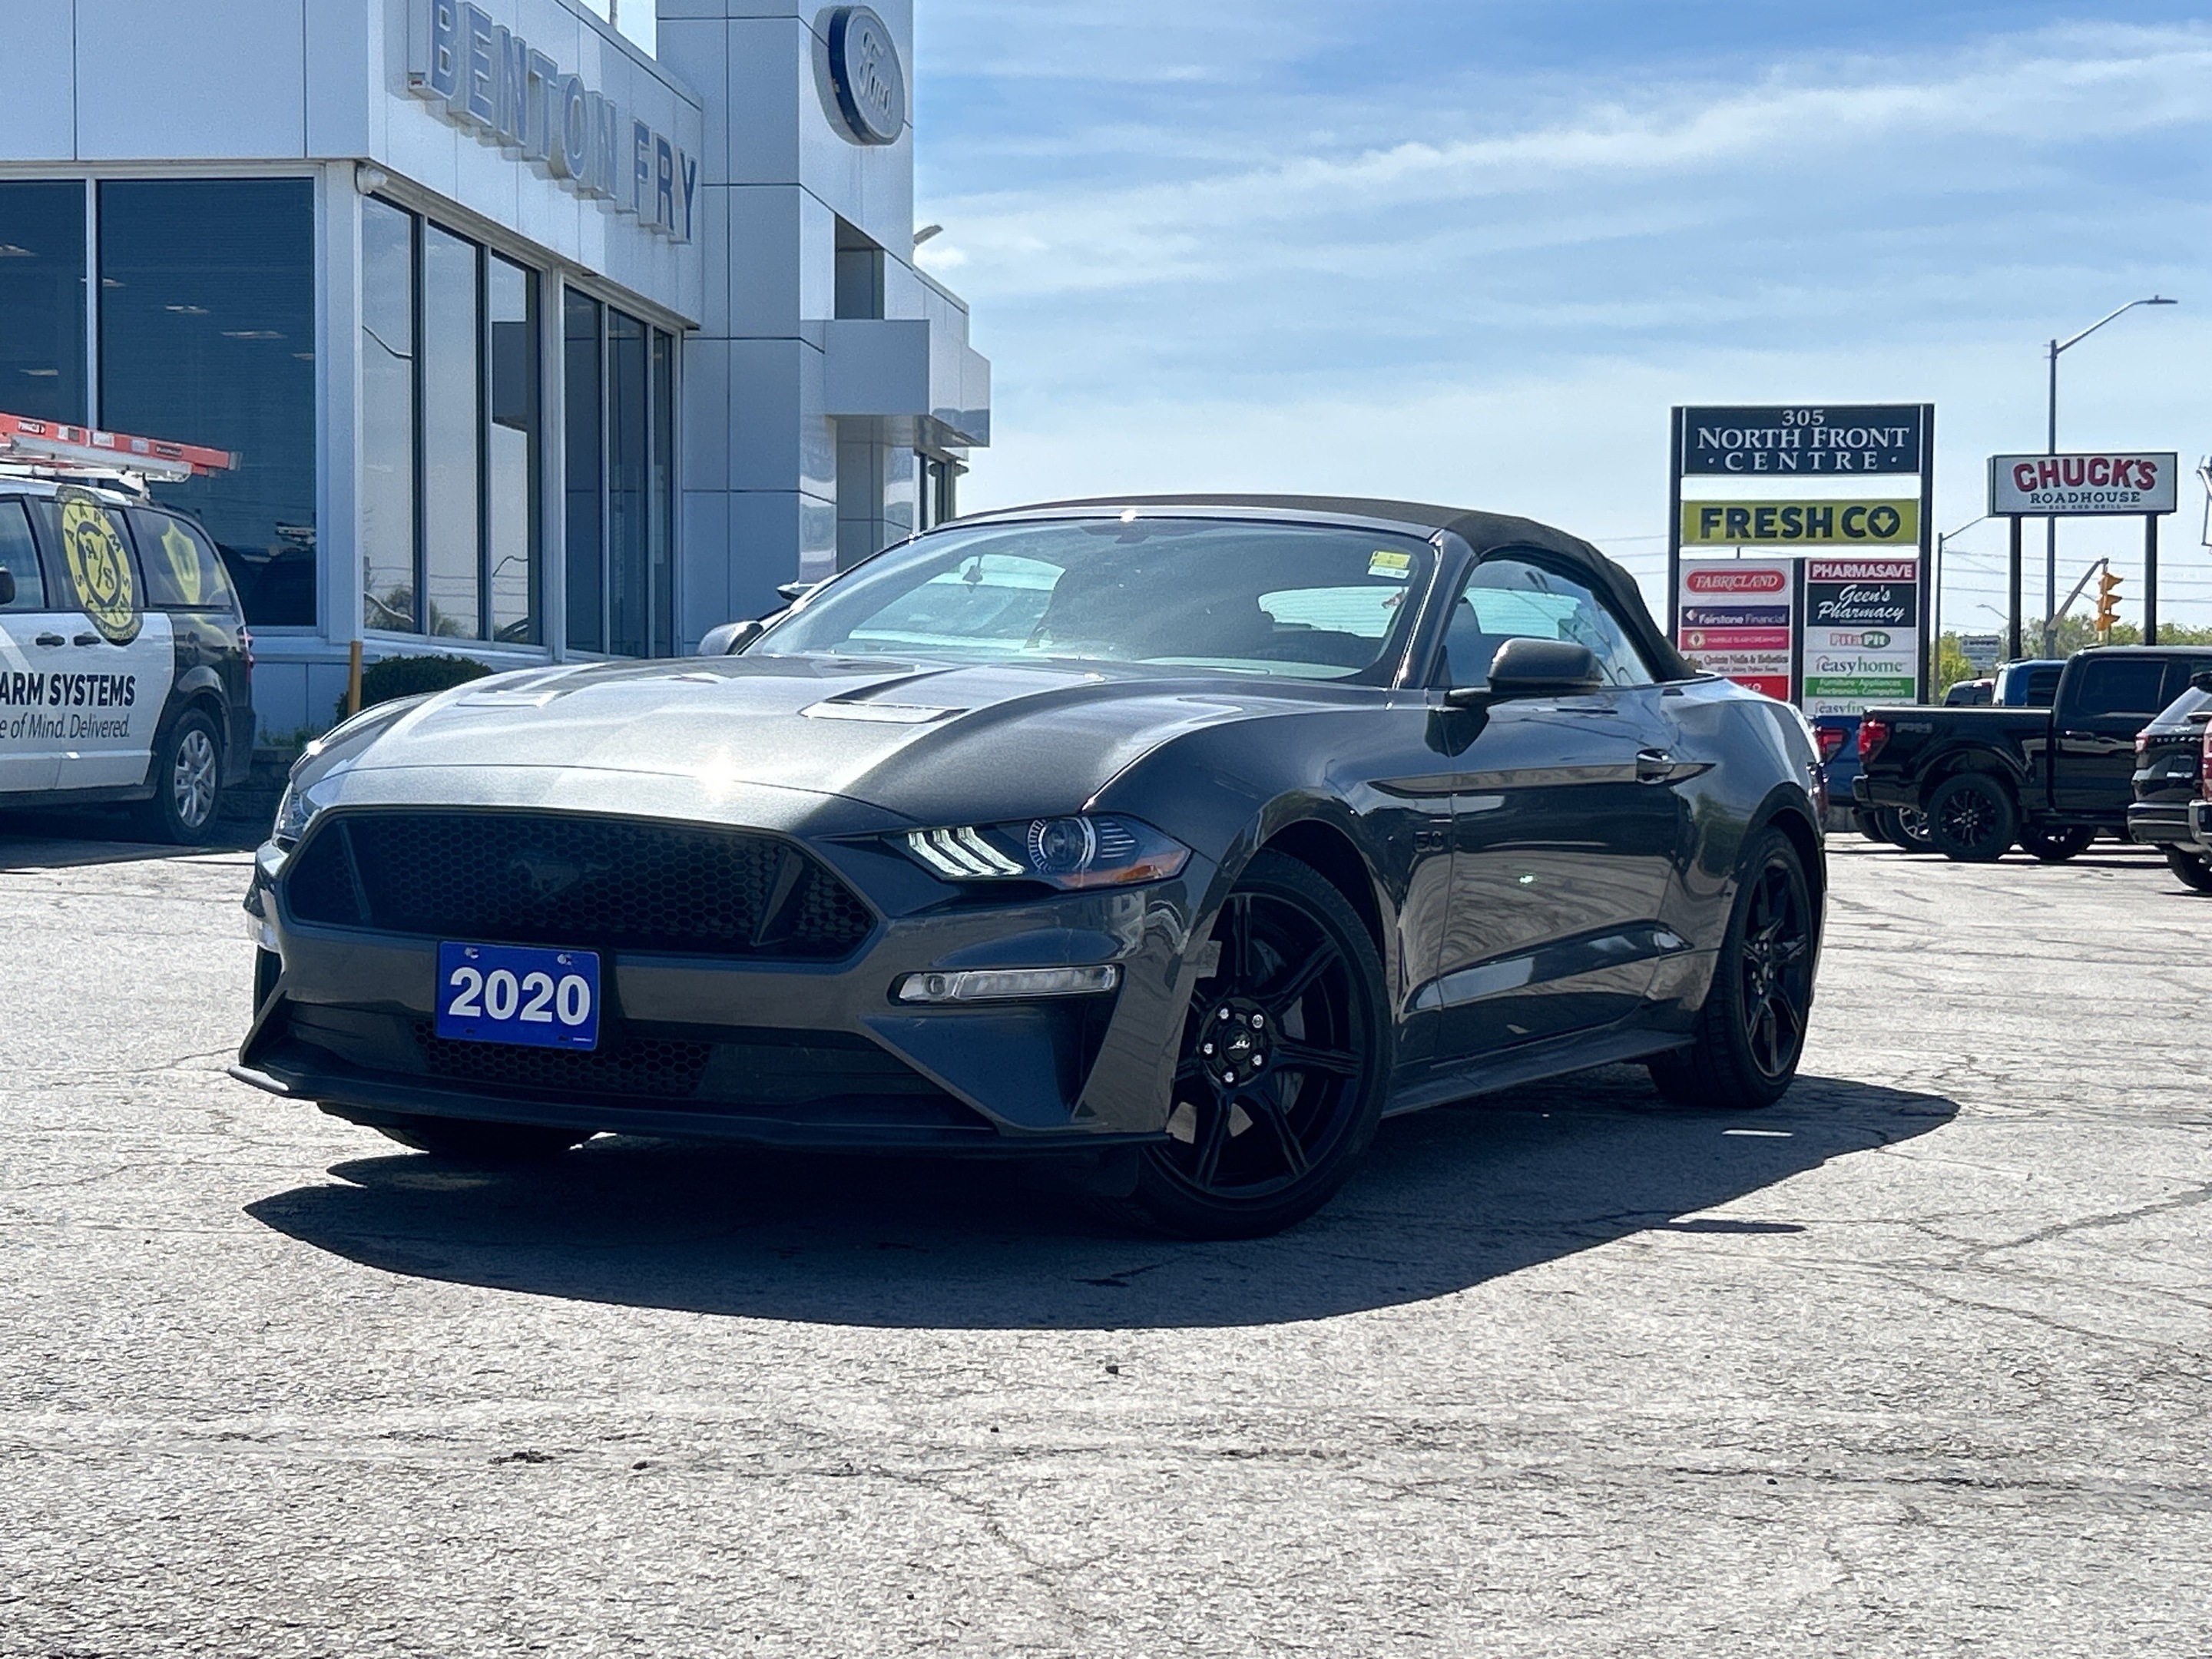 2020 Ford Mustang GT Premium - 5.0L Convertible Automatic Black Pack